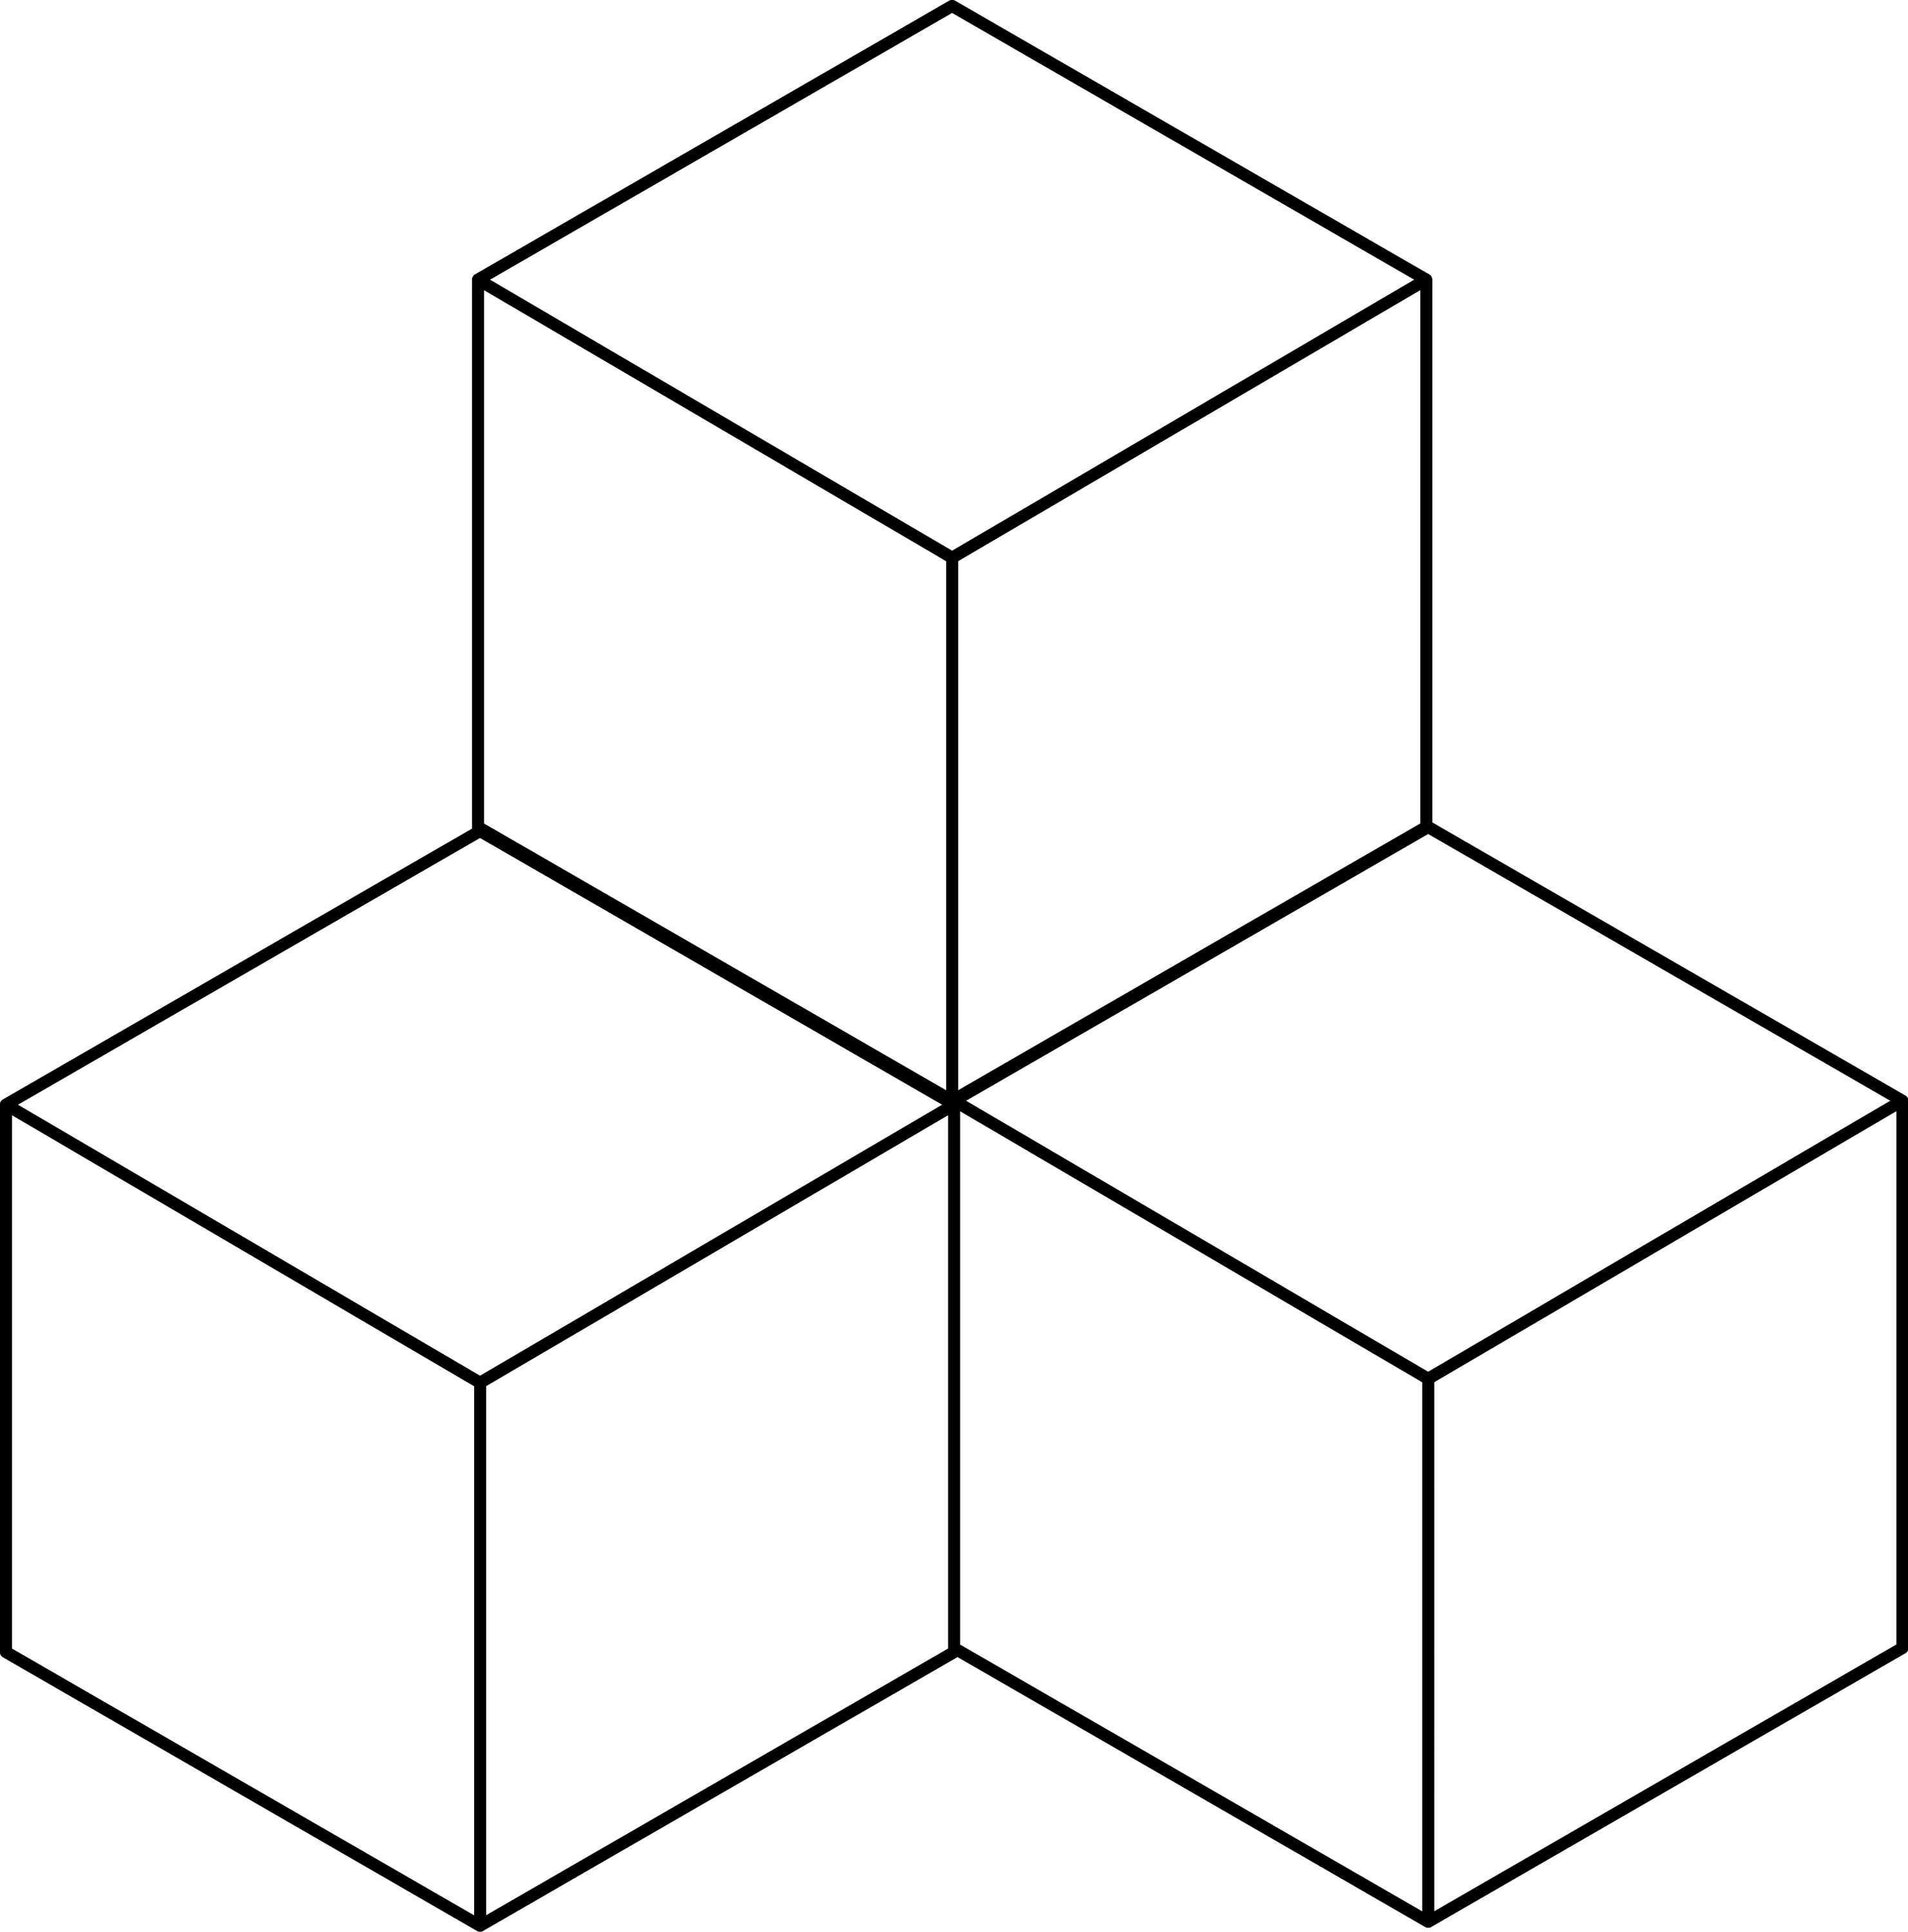 4 Stacked Congruent Cubes | ClipArt ETC